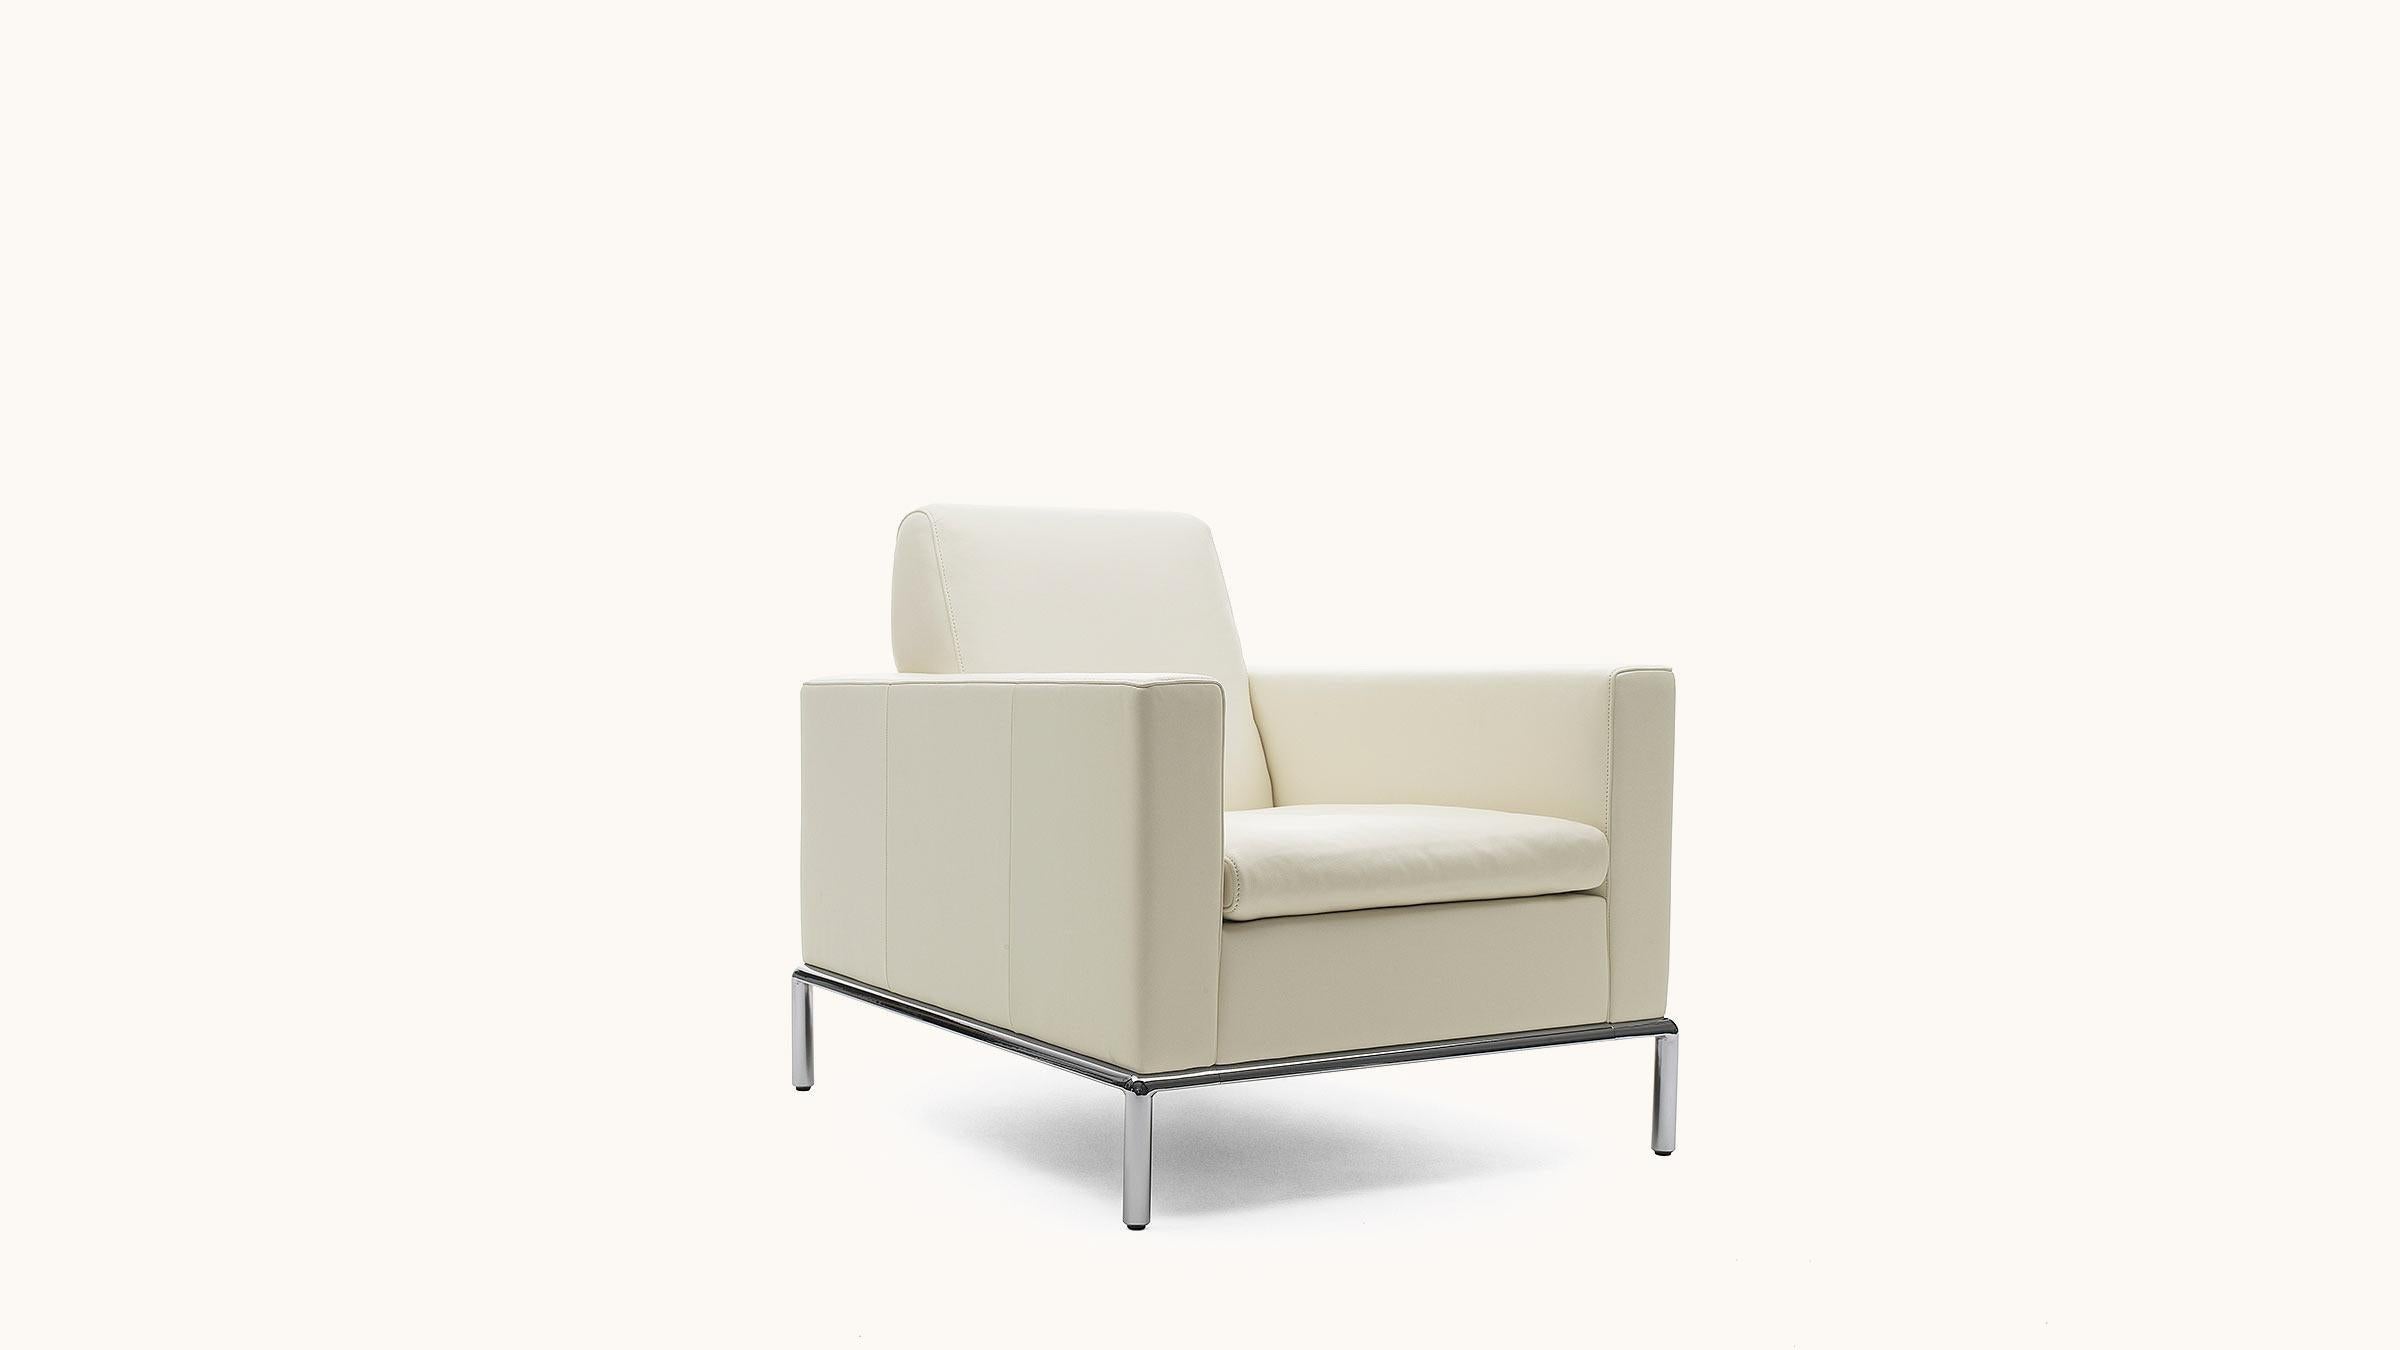 The DS-4 is a clear statement from the designer to follow an IDEA, a style, a personal claim to perfection to the very depths. Thanks to its raised backrest, the DS-4 offers that stylish comfort that is missing from conventional furniture. The